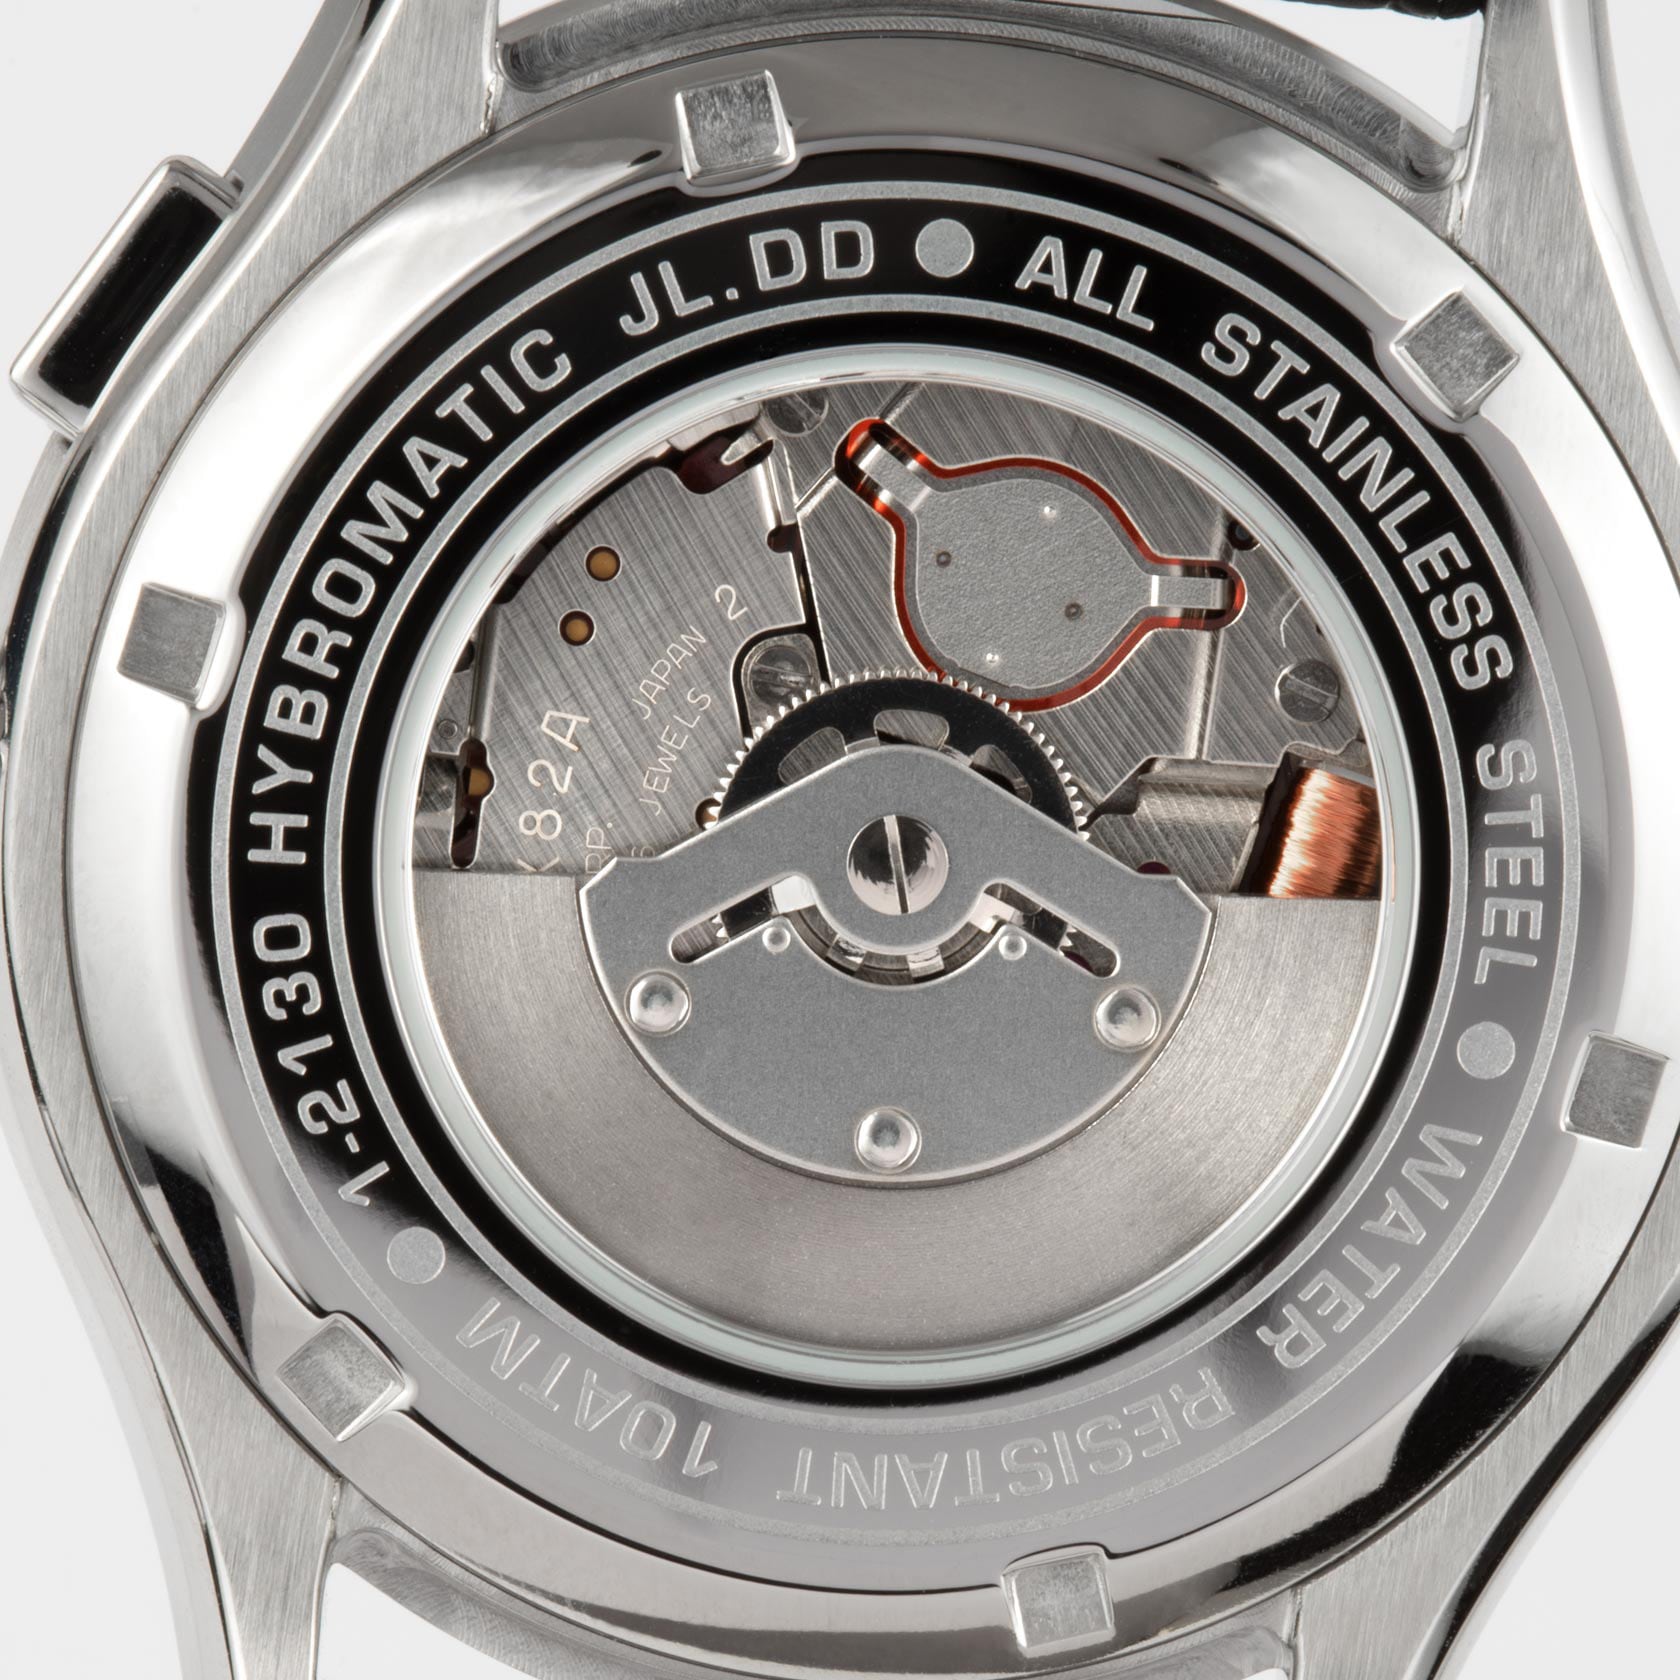 Jacques Lemans Kineticuhr »Hybromatic, 1-2130B« ♕ bei